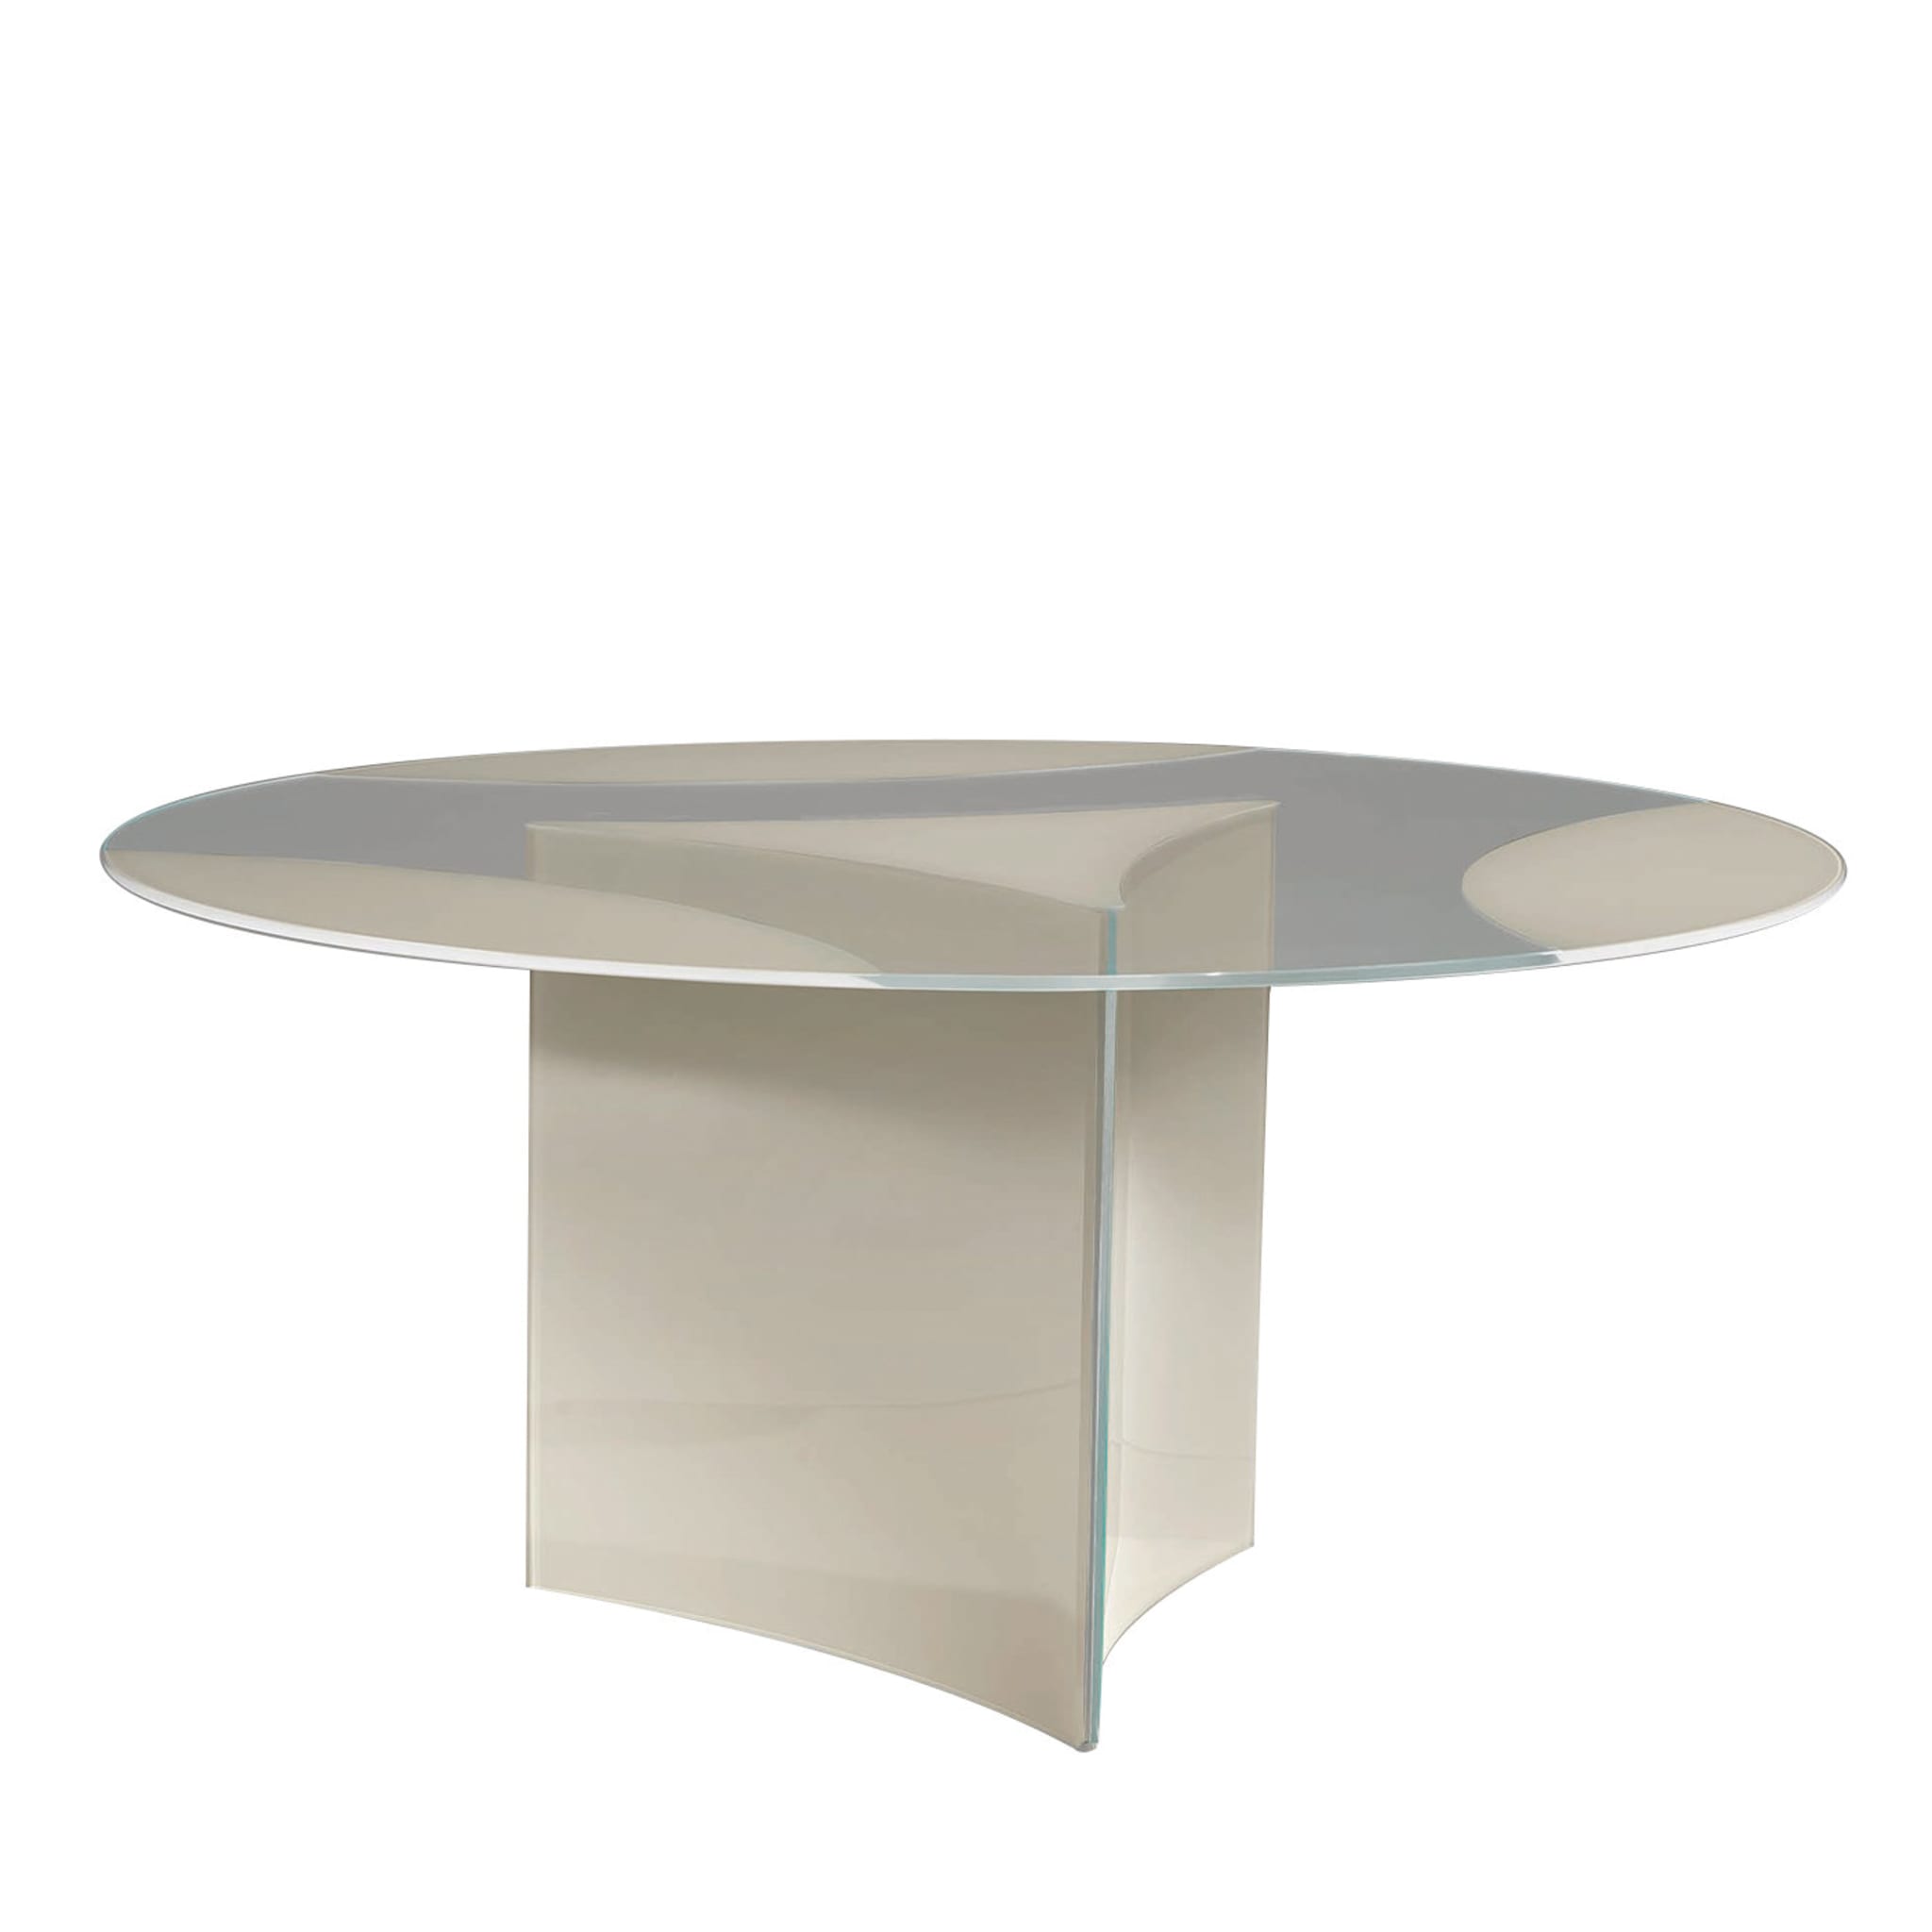 Dioniso Dining Table by Daniele Merini - Main view